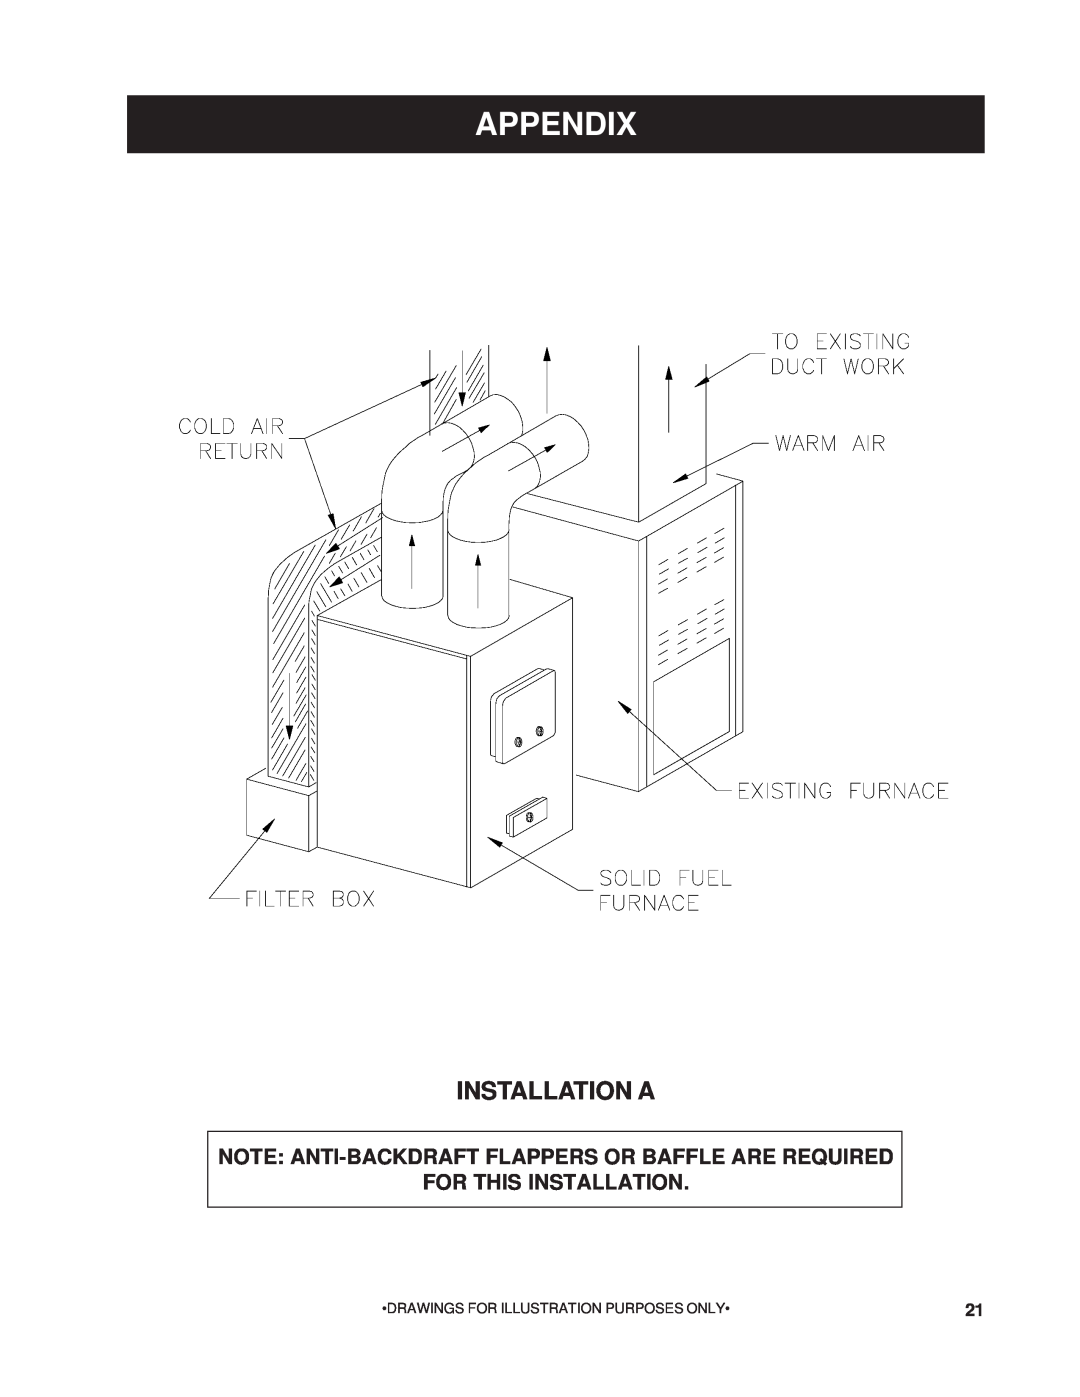 United States Stove 1200G Appendix, Installation A, For This Installation, Drawings For Illustration Purposes Only 